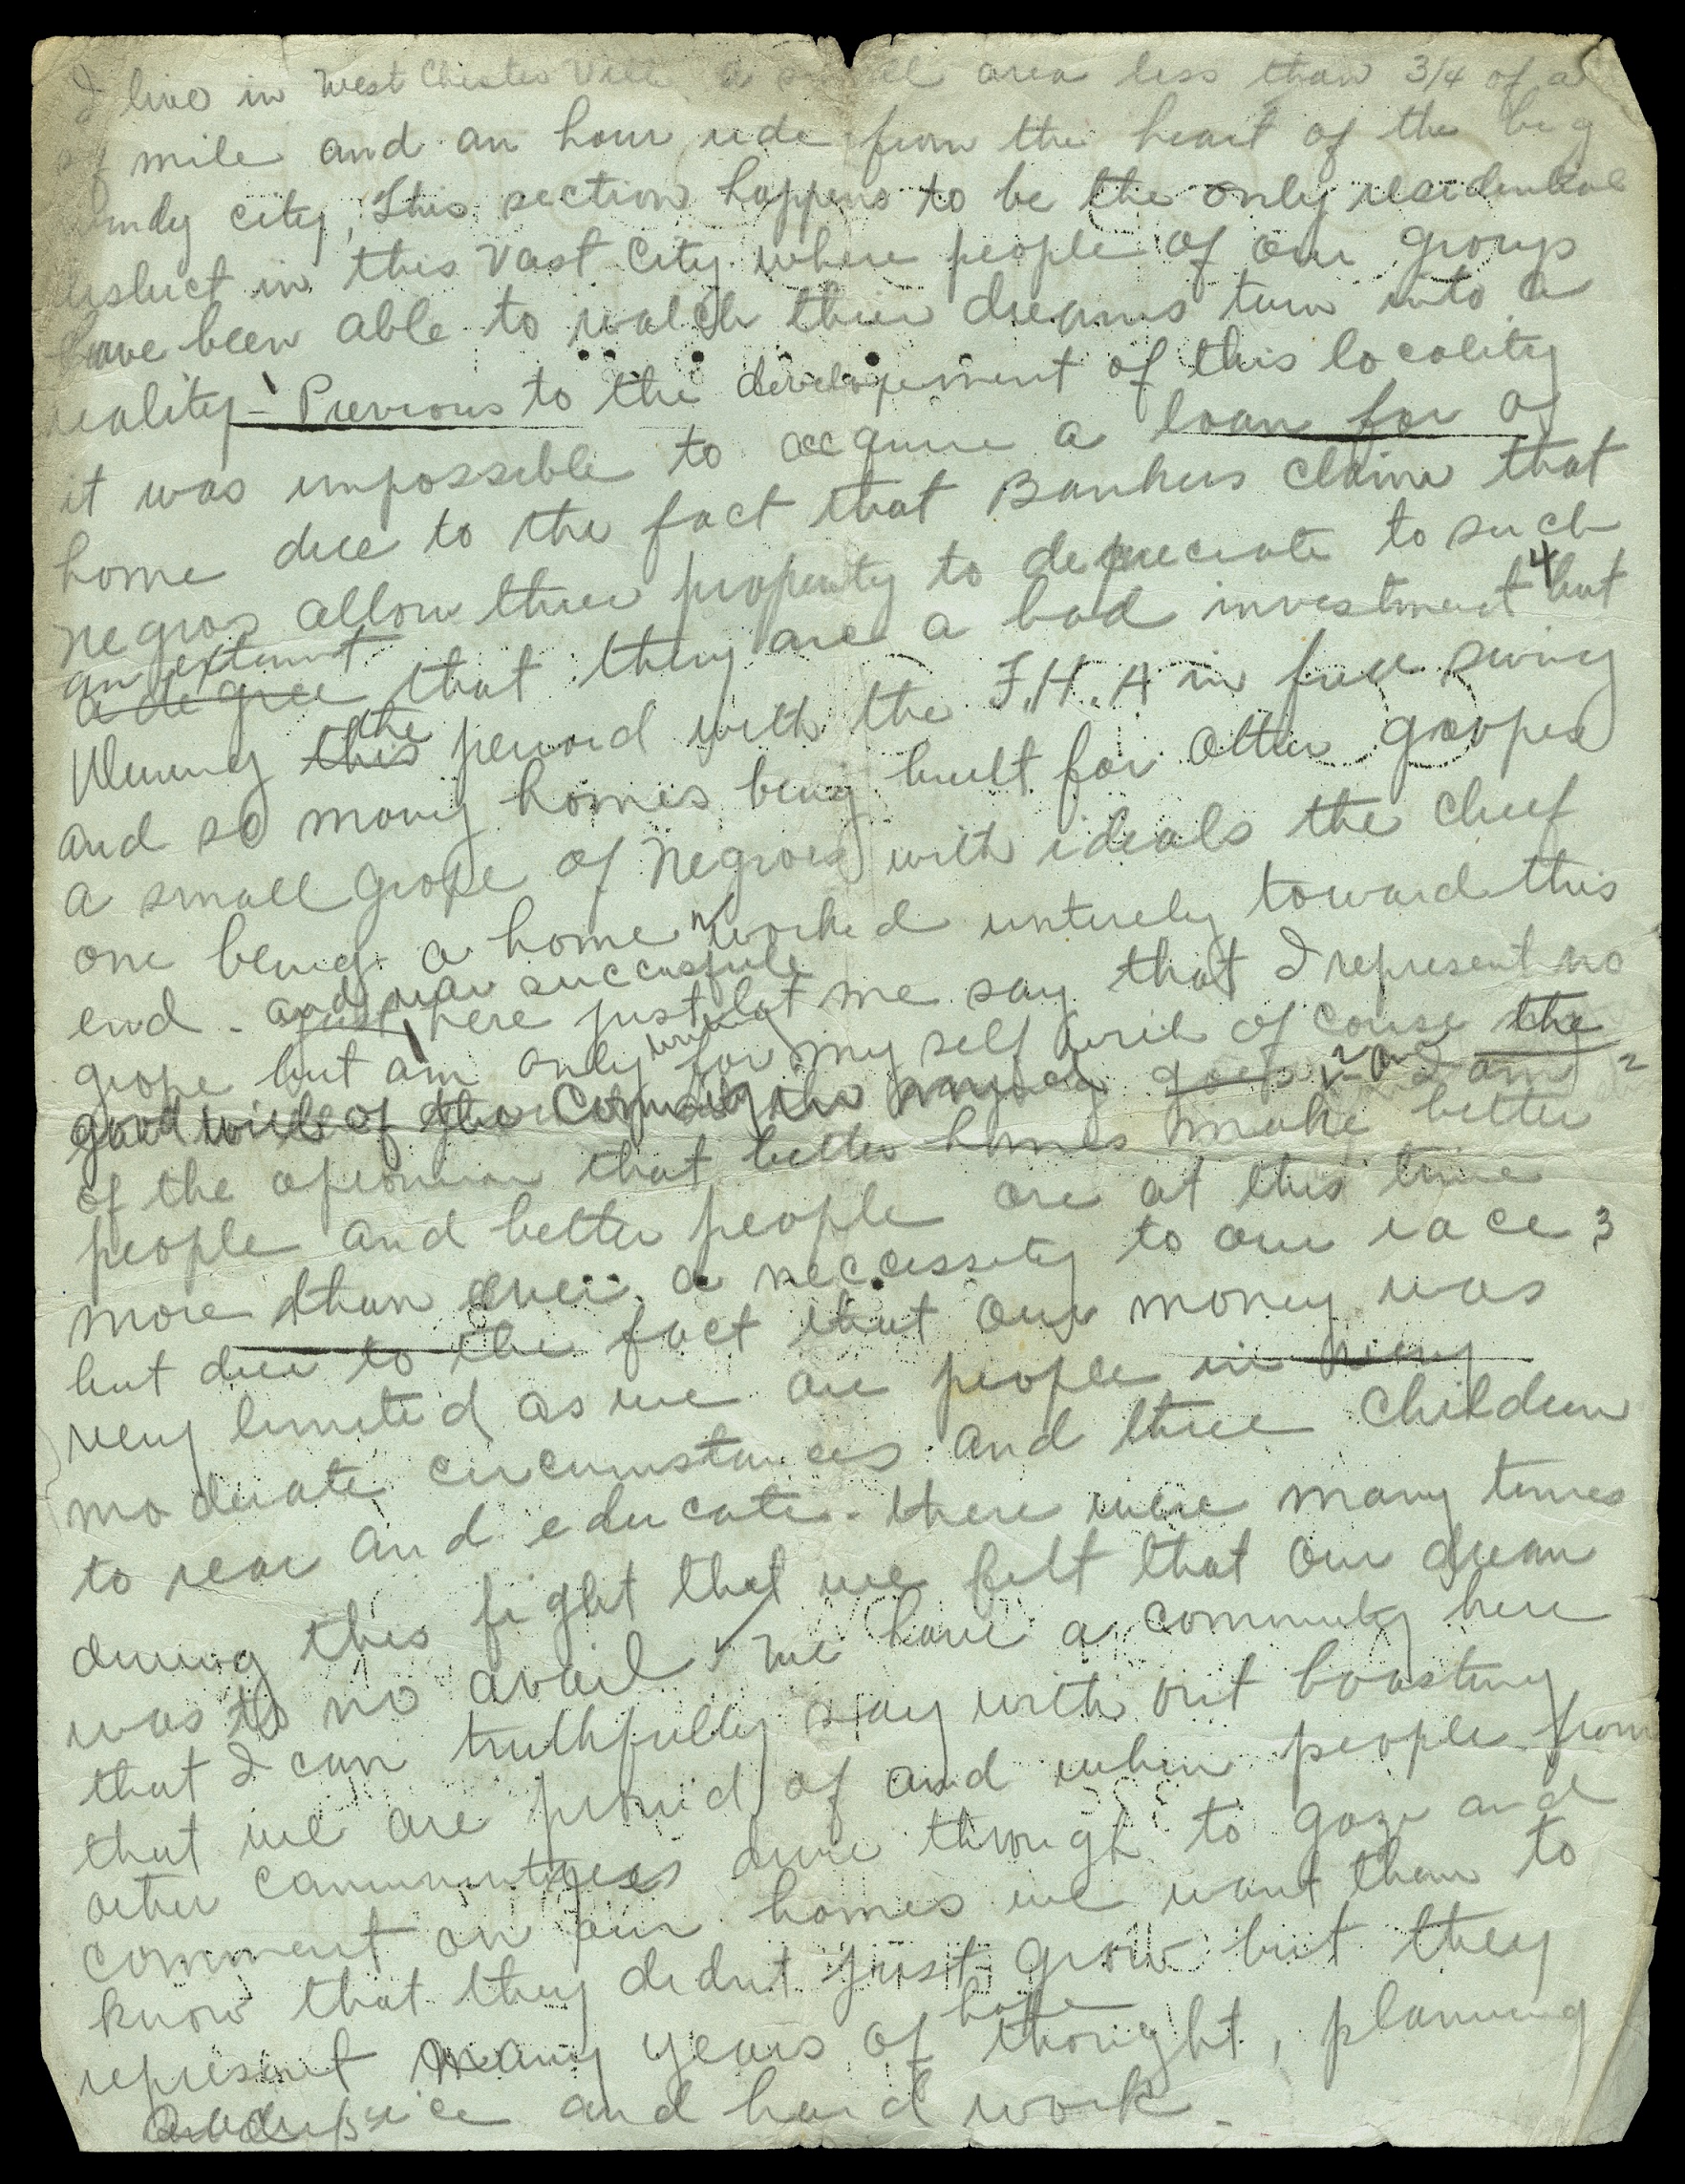 Single page of cursive text in pencil. The text describes the author's experiences and advocates for better housing access for African Americans in Chicago